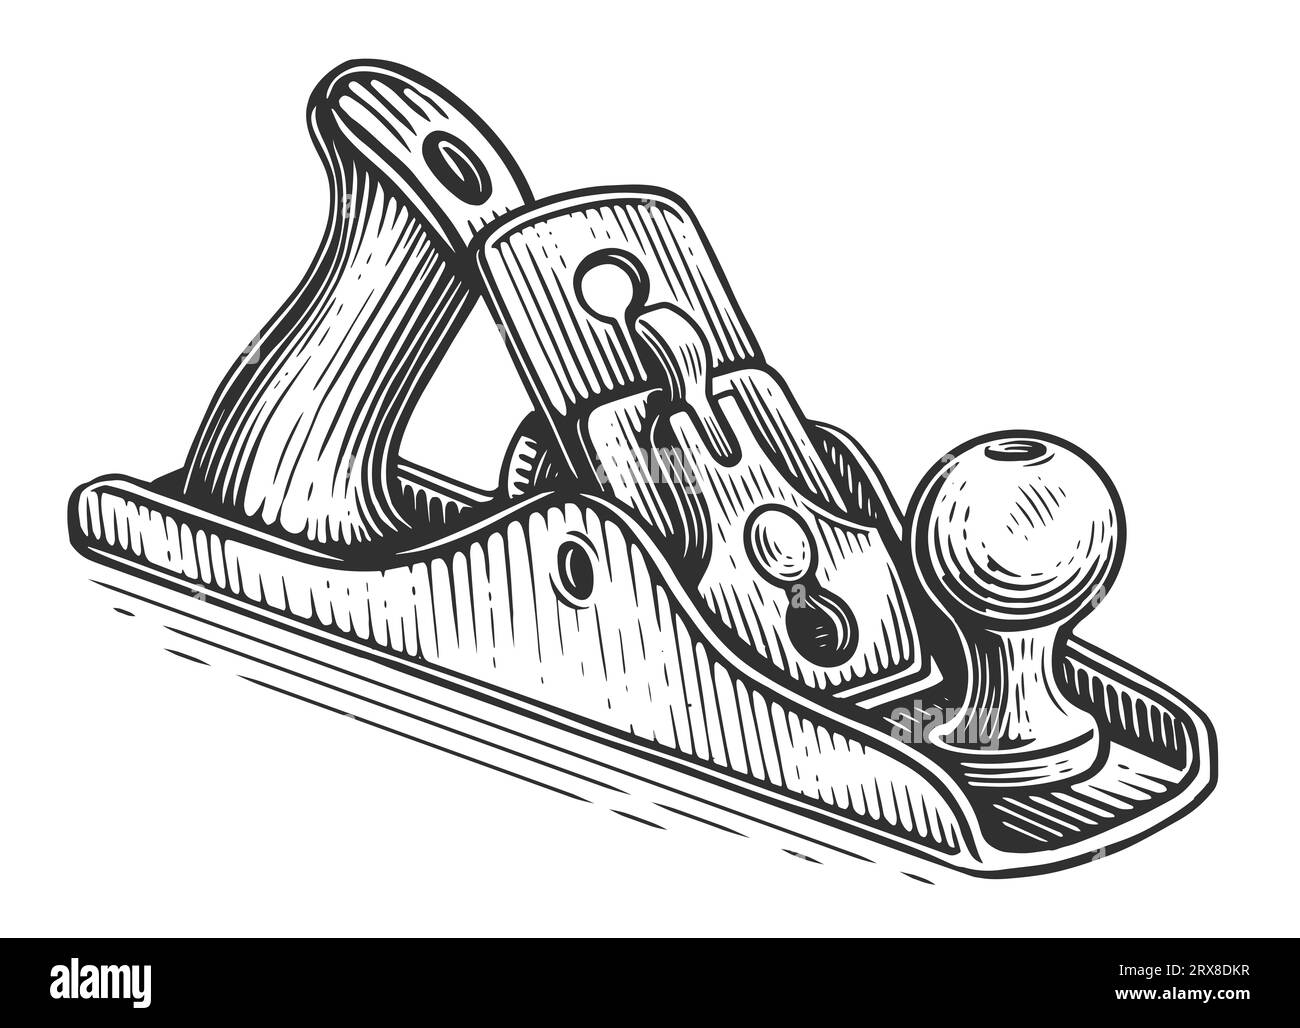 Wooden plane in sketch style. Woodworking tool vintage illustration Stock Photo